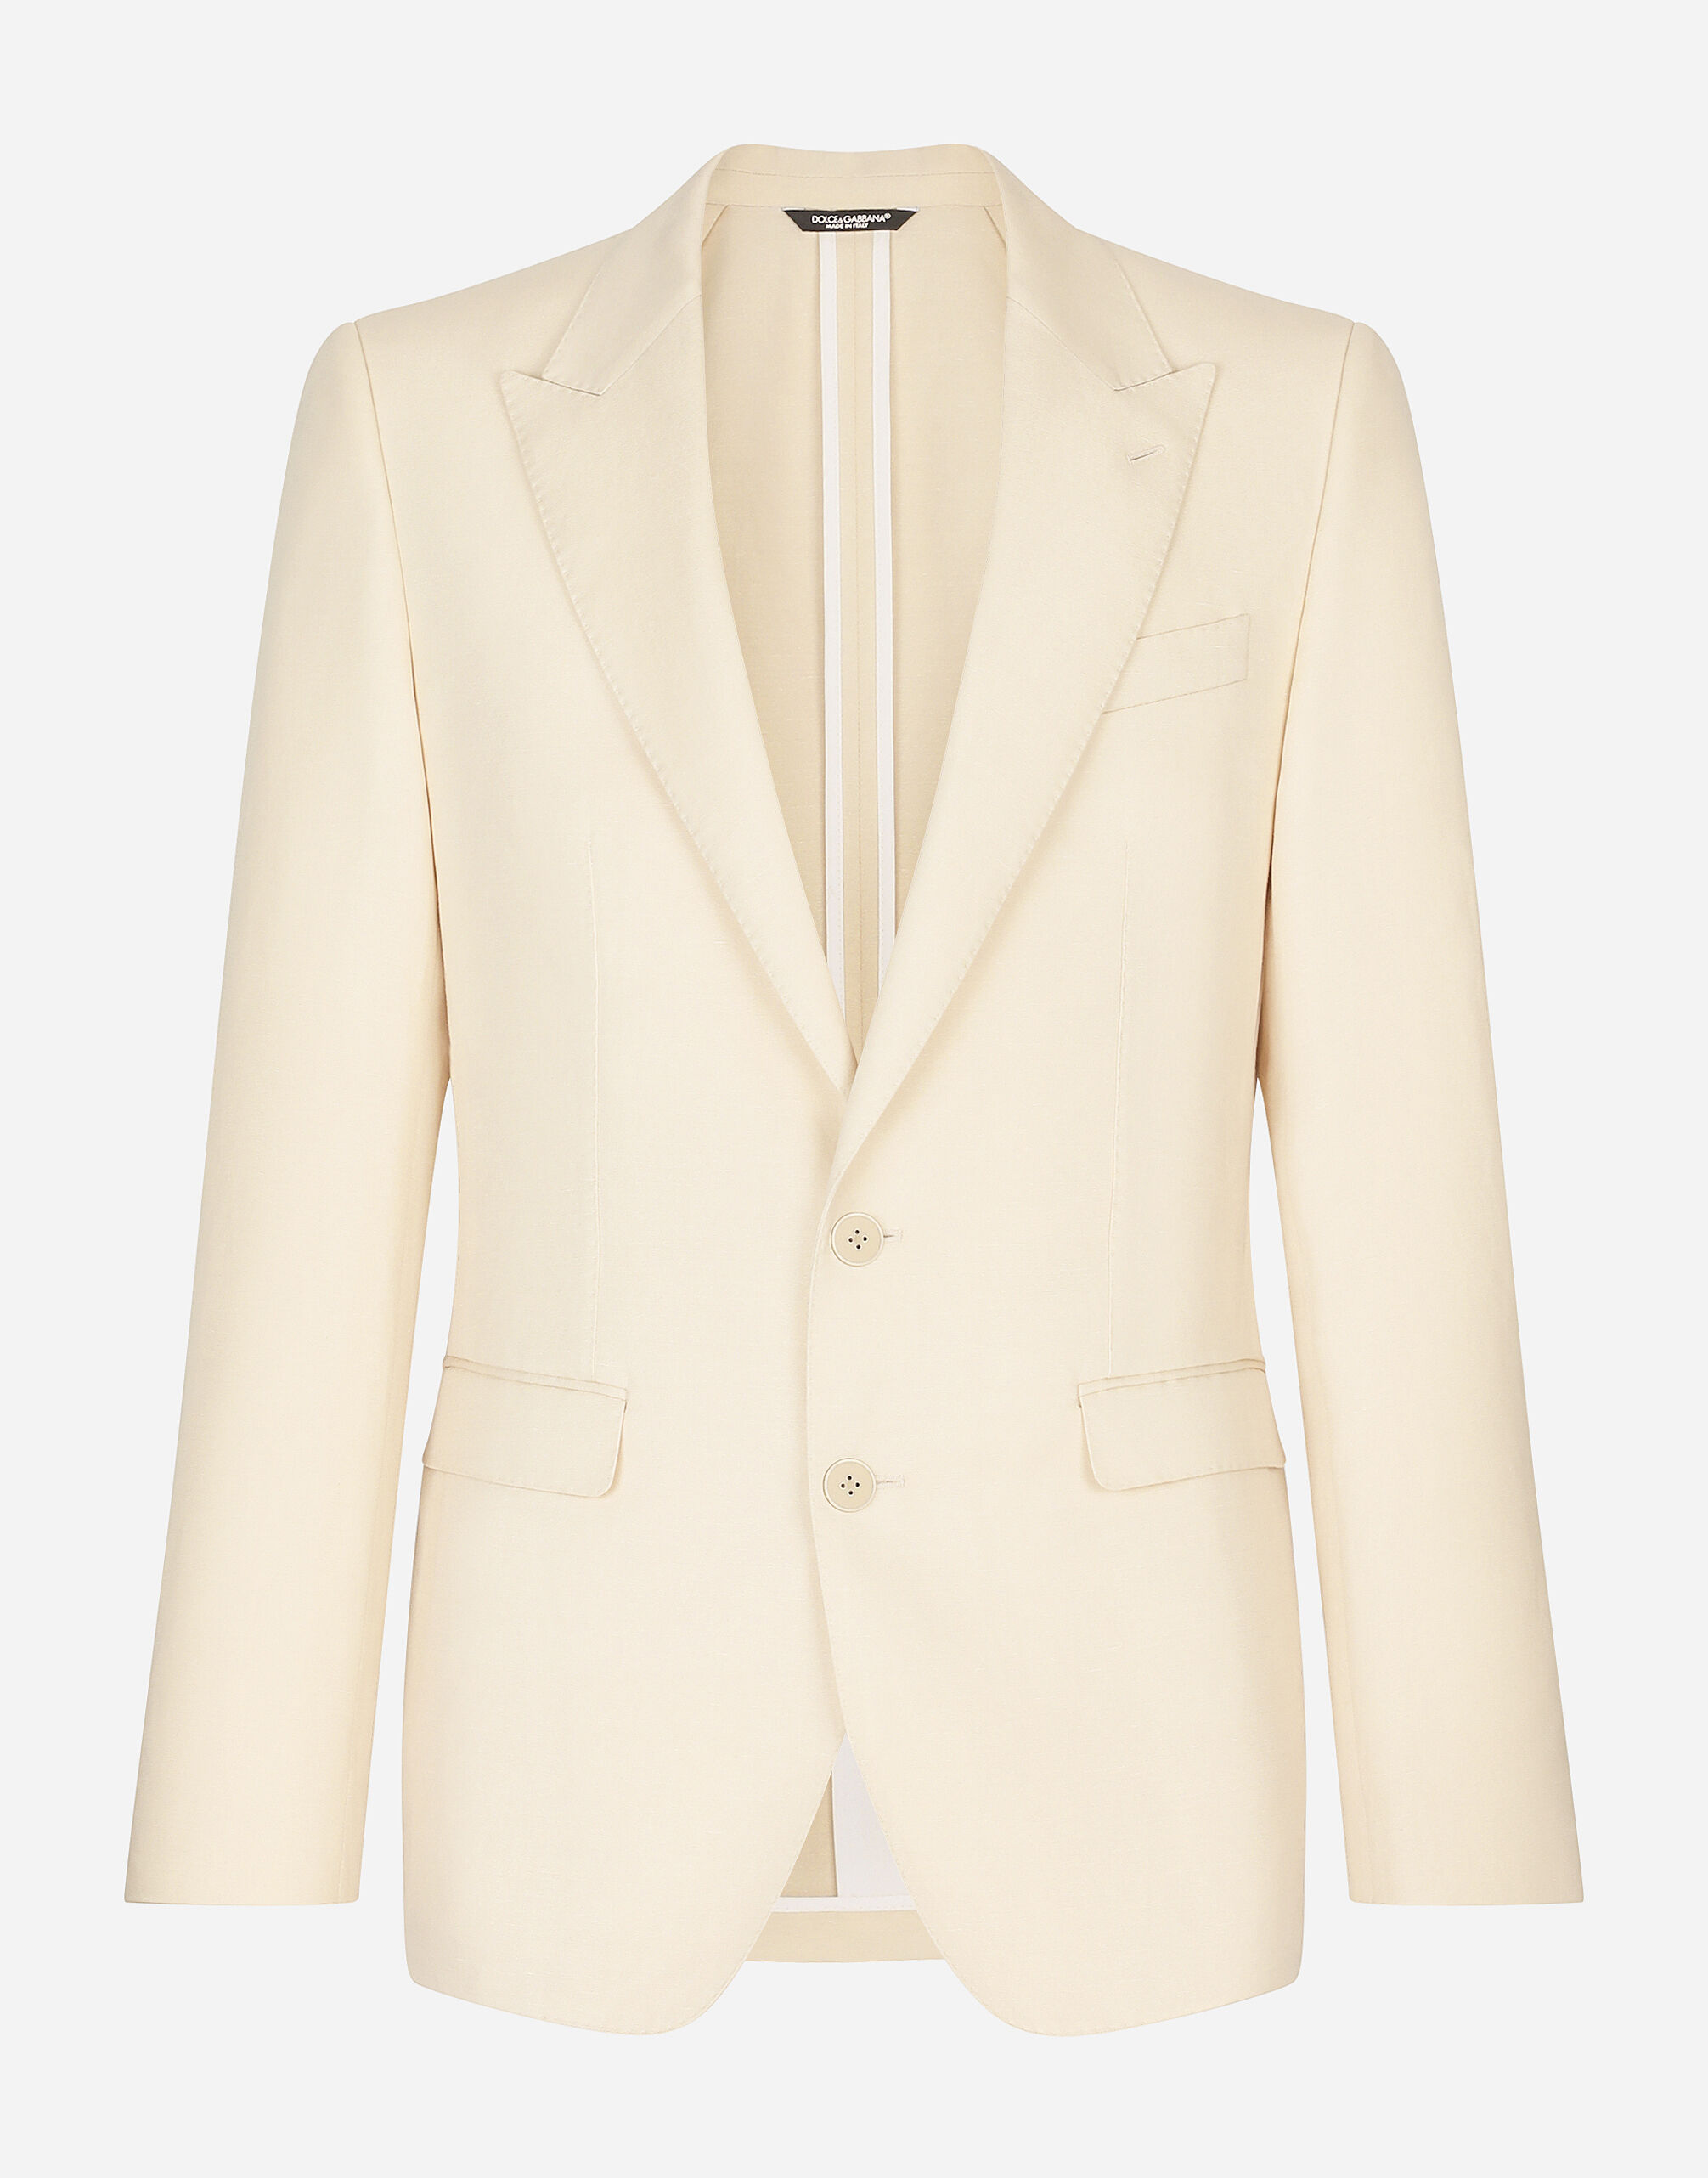 ${brand} Single-breasted Taormina jacket in linen, cotton and silk ${colorDescription} ${masterID}